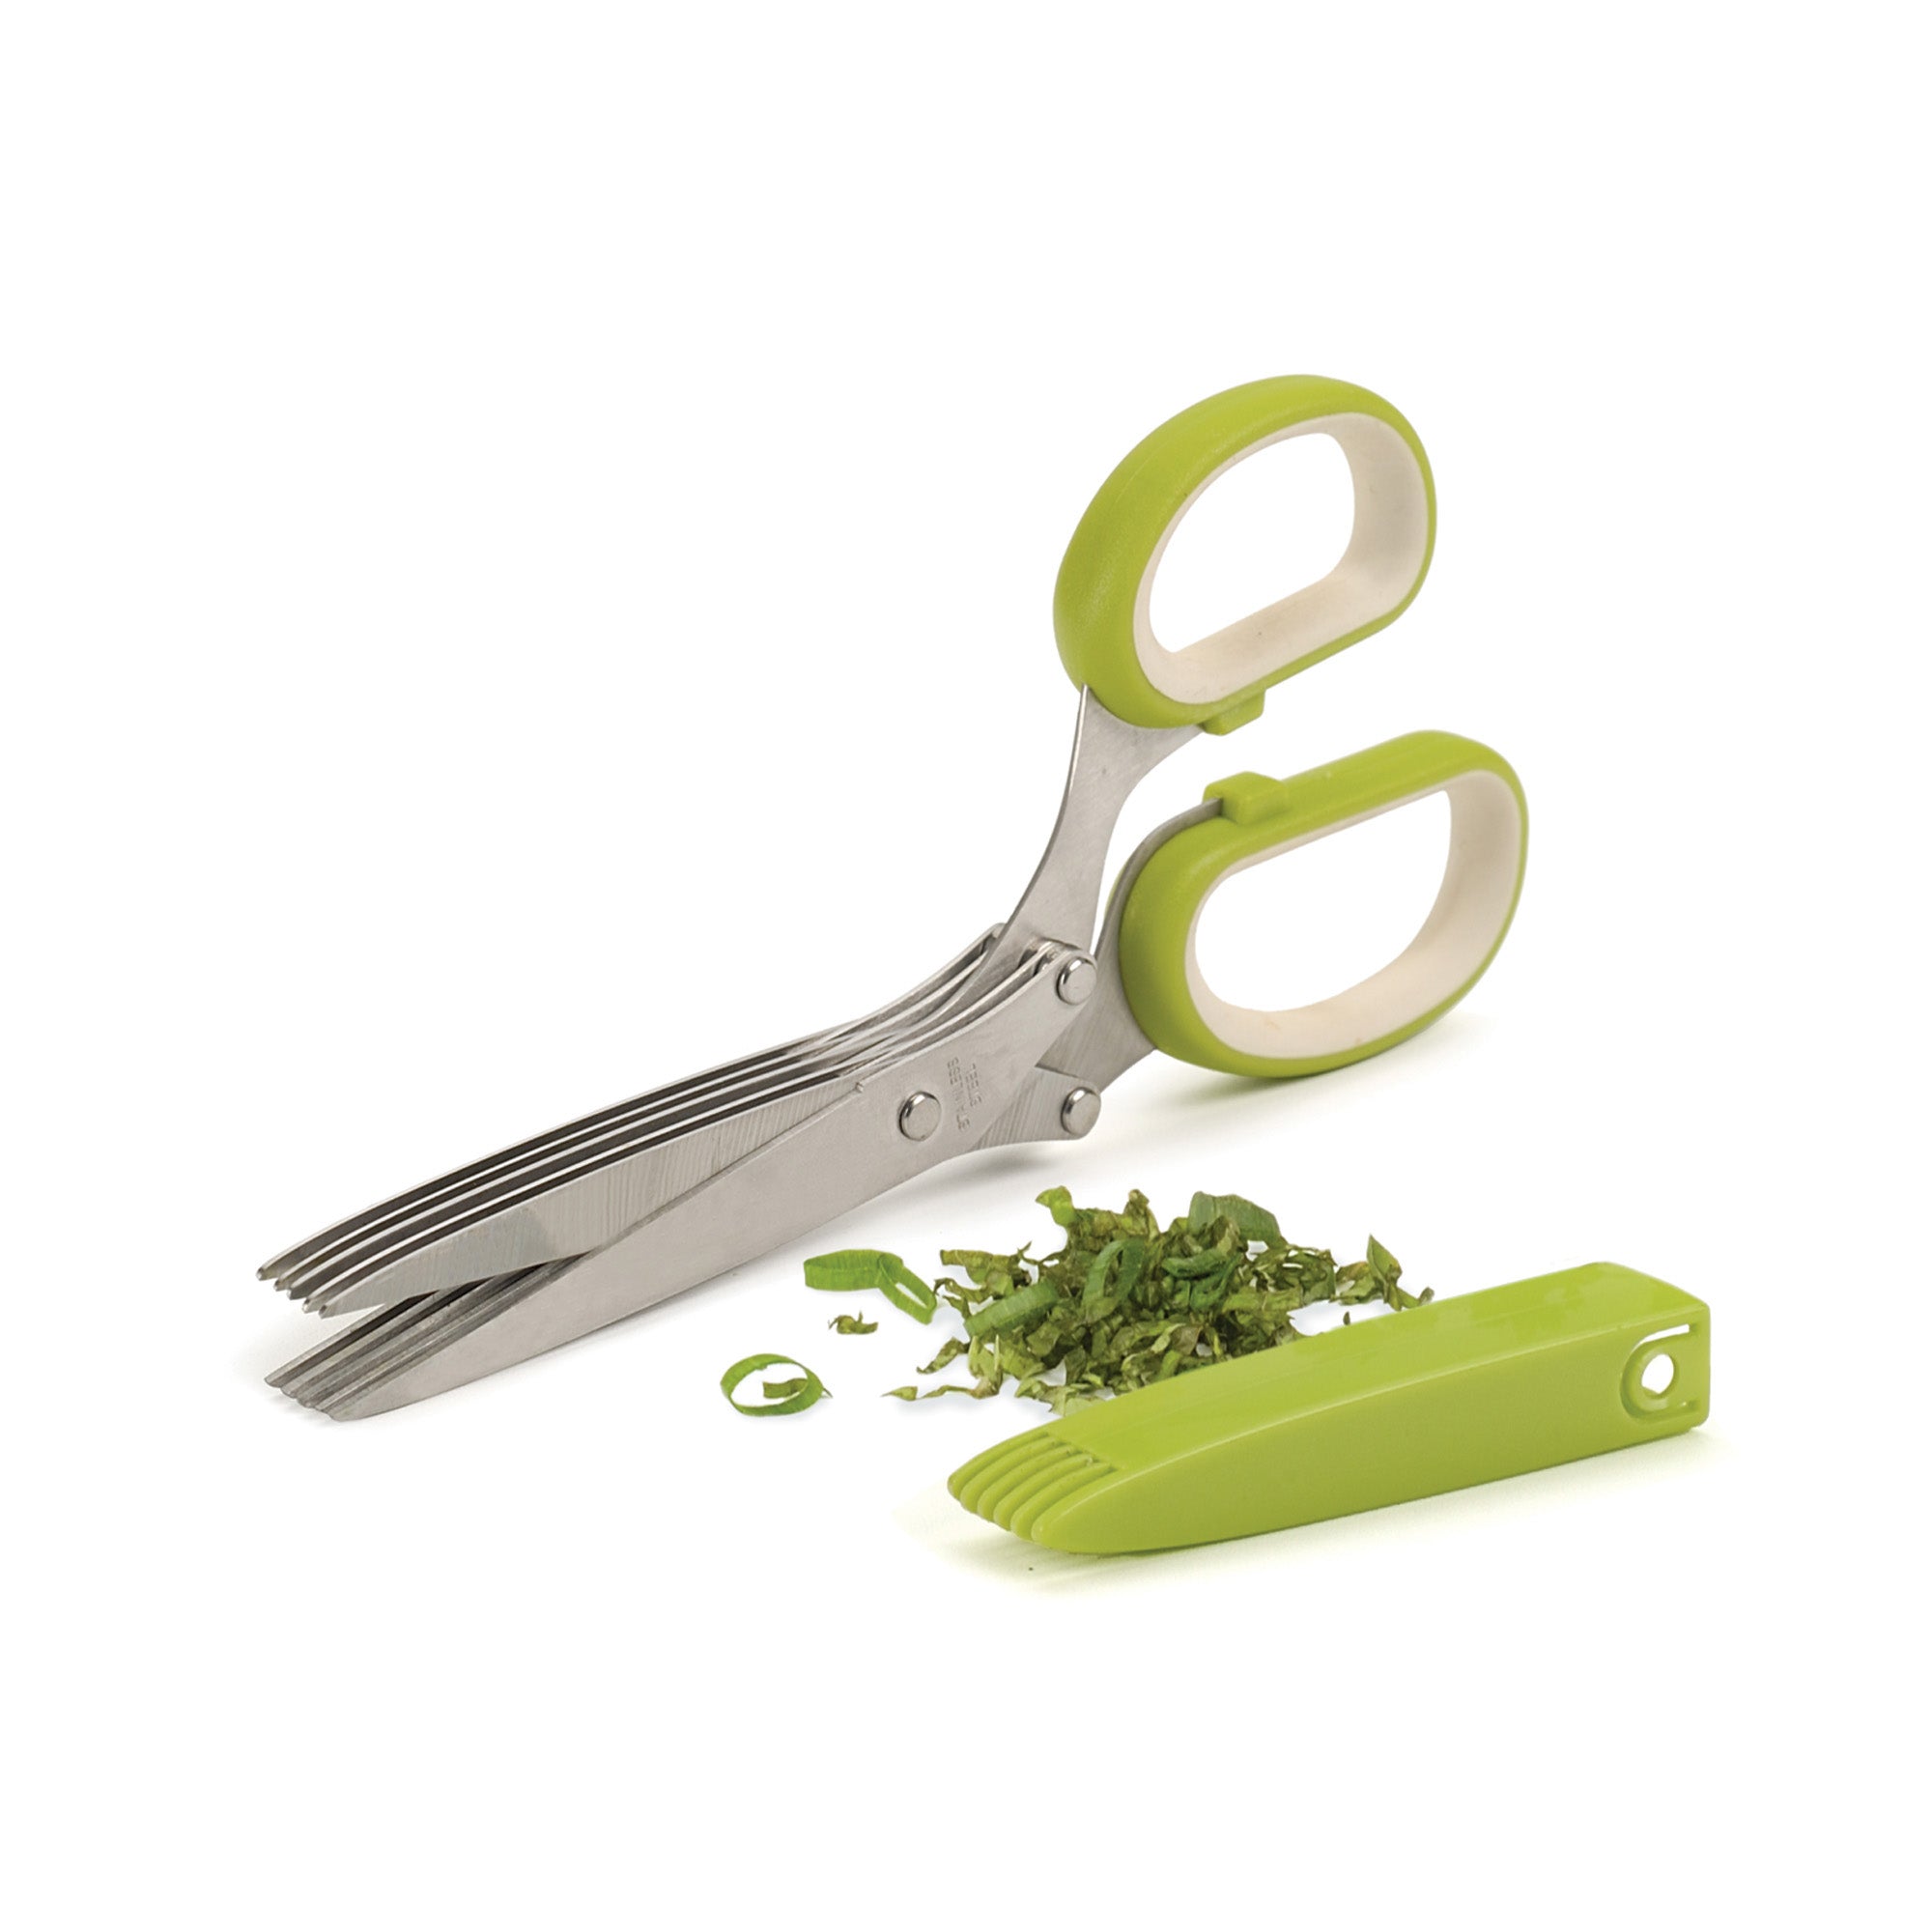 Westmark Germany Stainless Steel 5 Blade Herb Scissors With Lime Green  Handle And Cleaning Comb 11752280